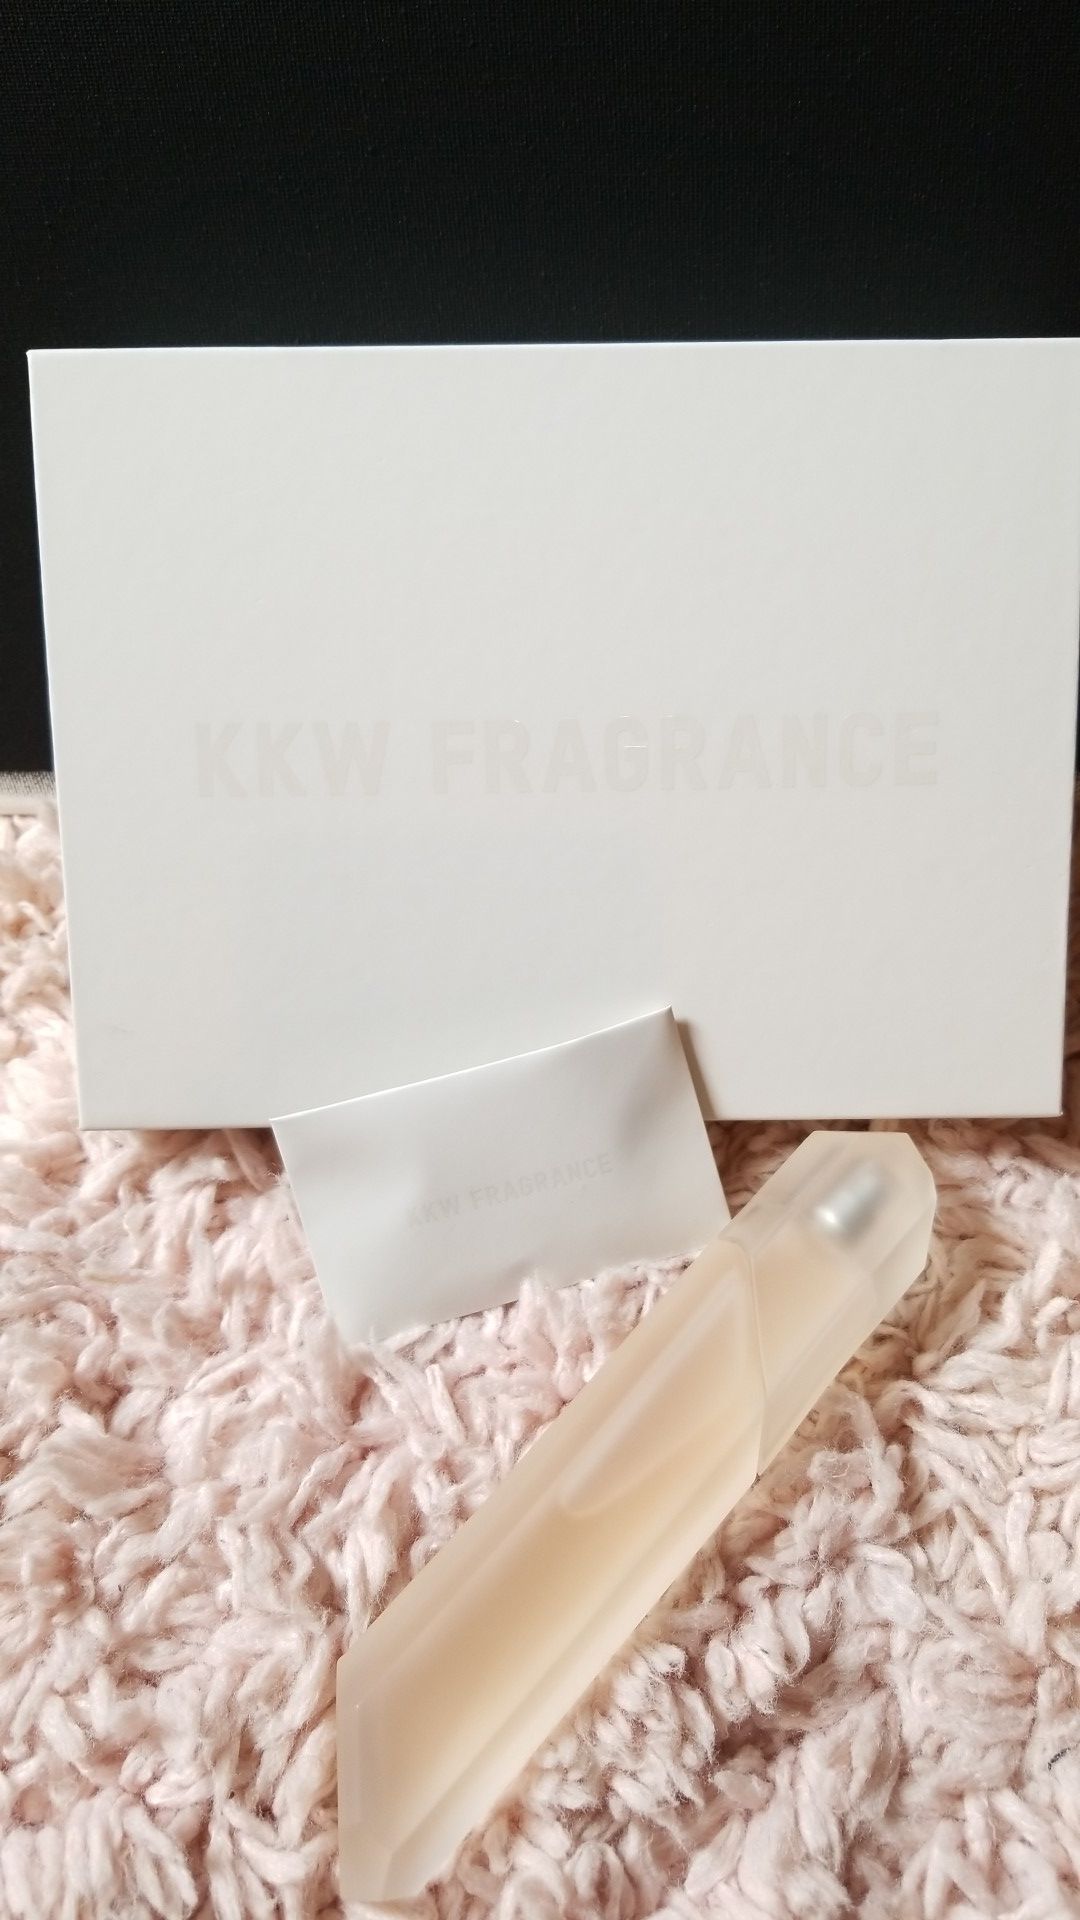 KKW FRAGRANCE for Sale in Vancouver, WA - OfferUp